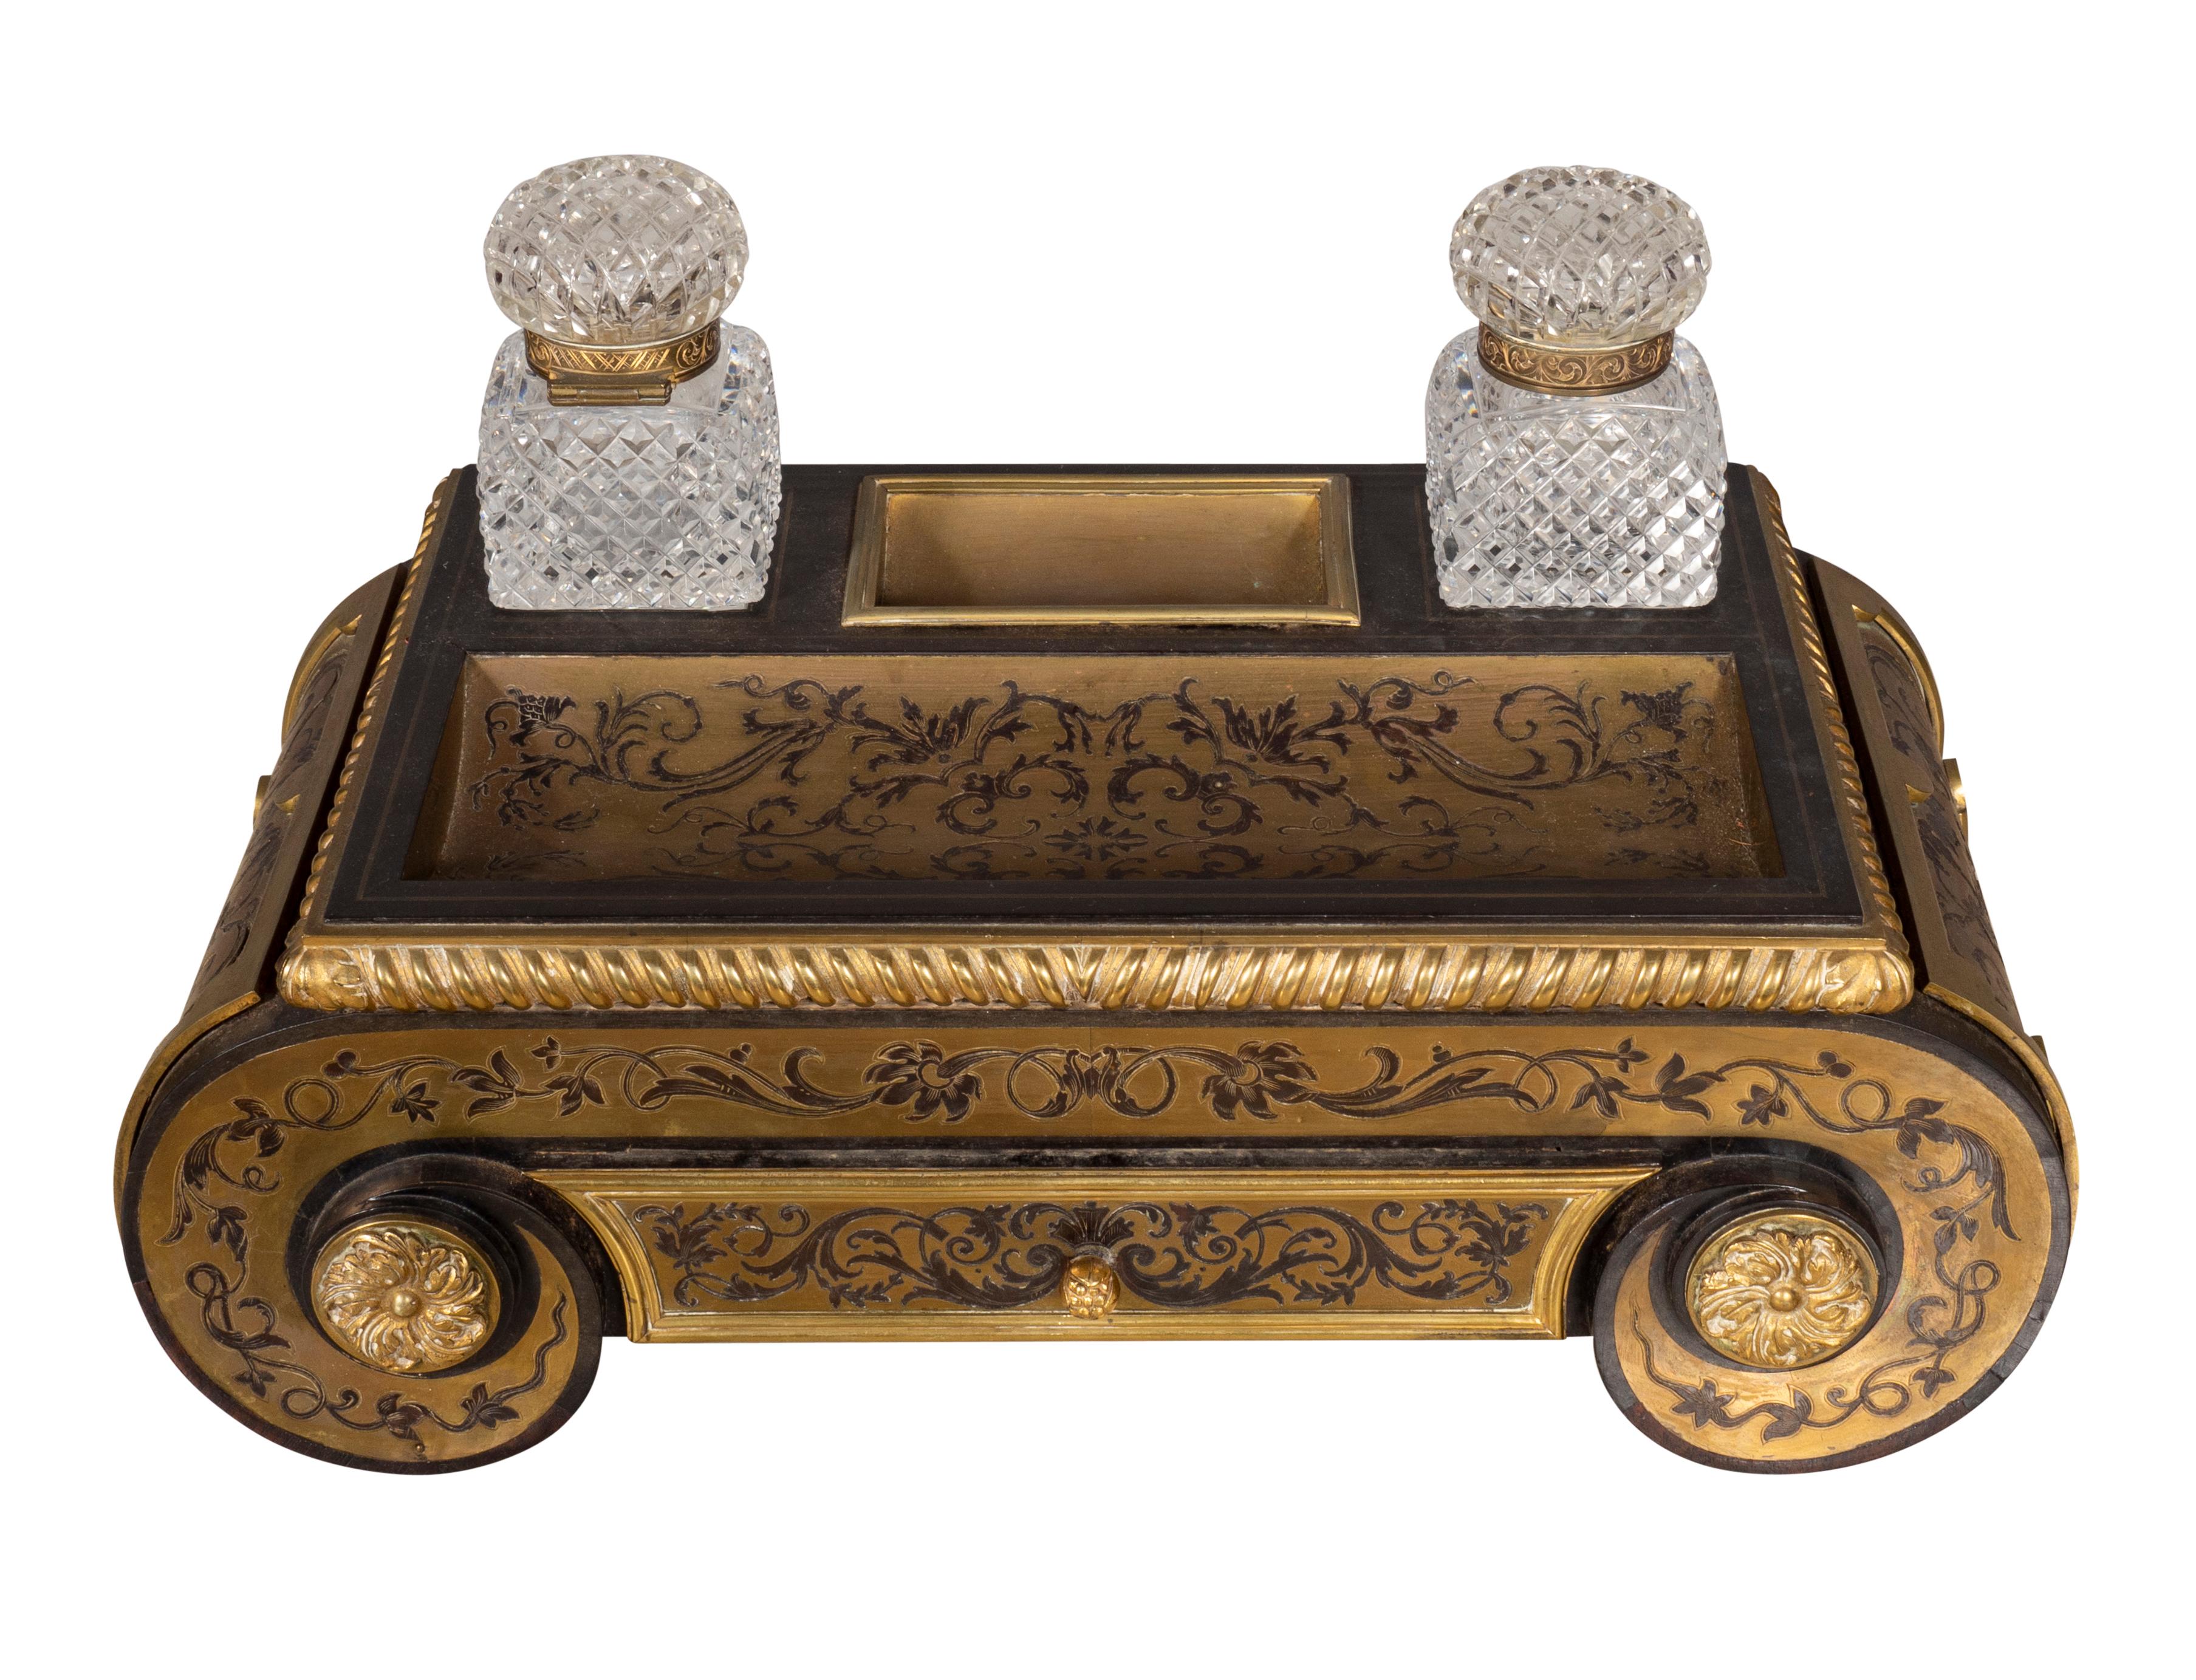 Rectangular with two cut glass inkwells and pen tray over a drawer. The sides rounded. The inspiration for the decoration from designs by the master cabinet maker Andre Charles Boulle from the court of Louis XIV.